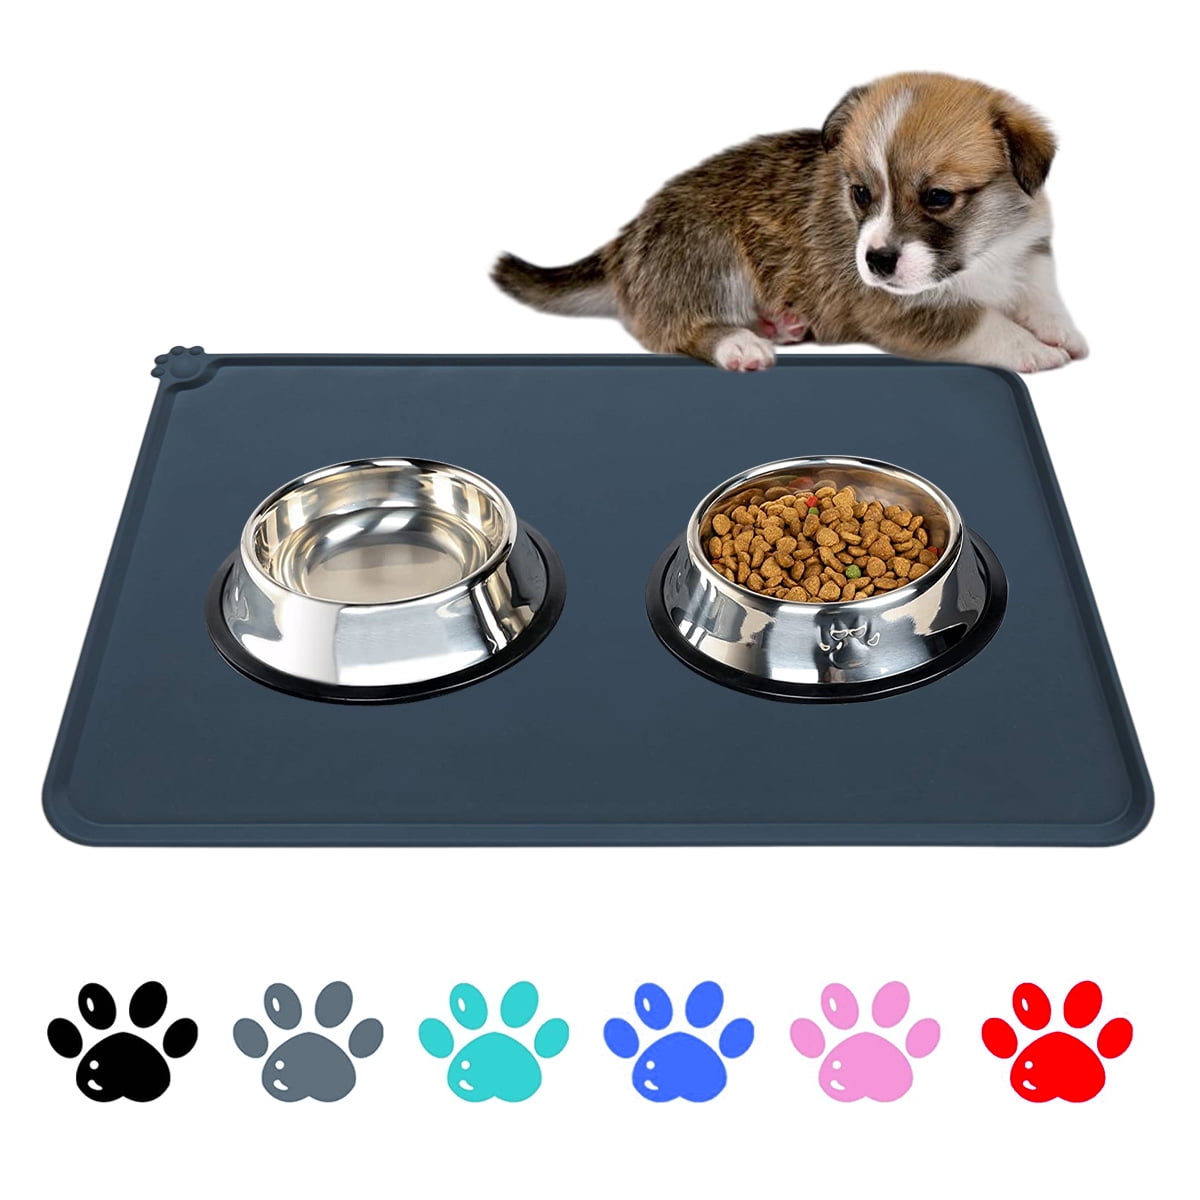 Ag-unicorn Silicone Cat Food Mat Dog Food Mat, Waterproof Pet Feeding Mat  for Water Bowl and Food, Cute Rubber Animal Feeder Mat for Messy Drinker